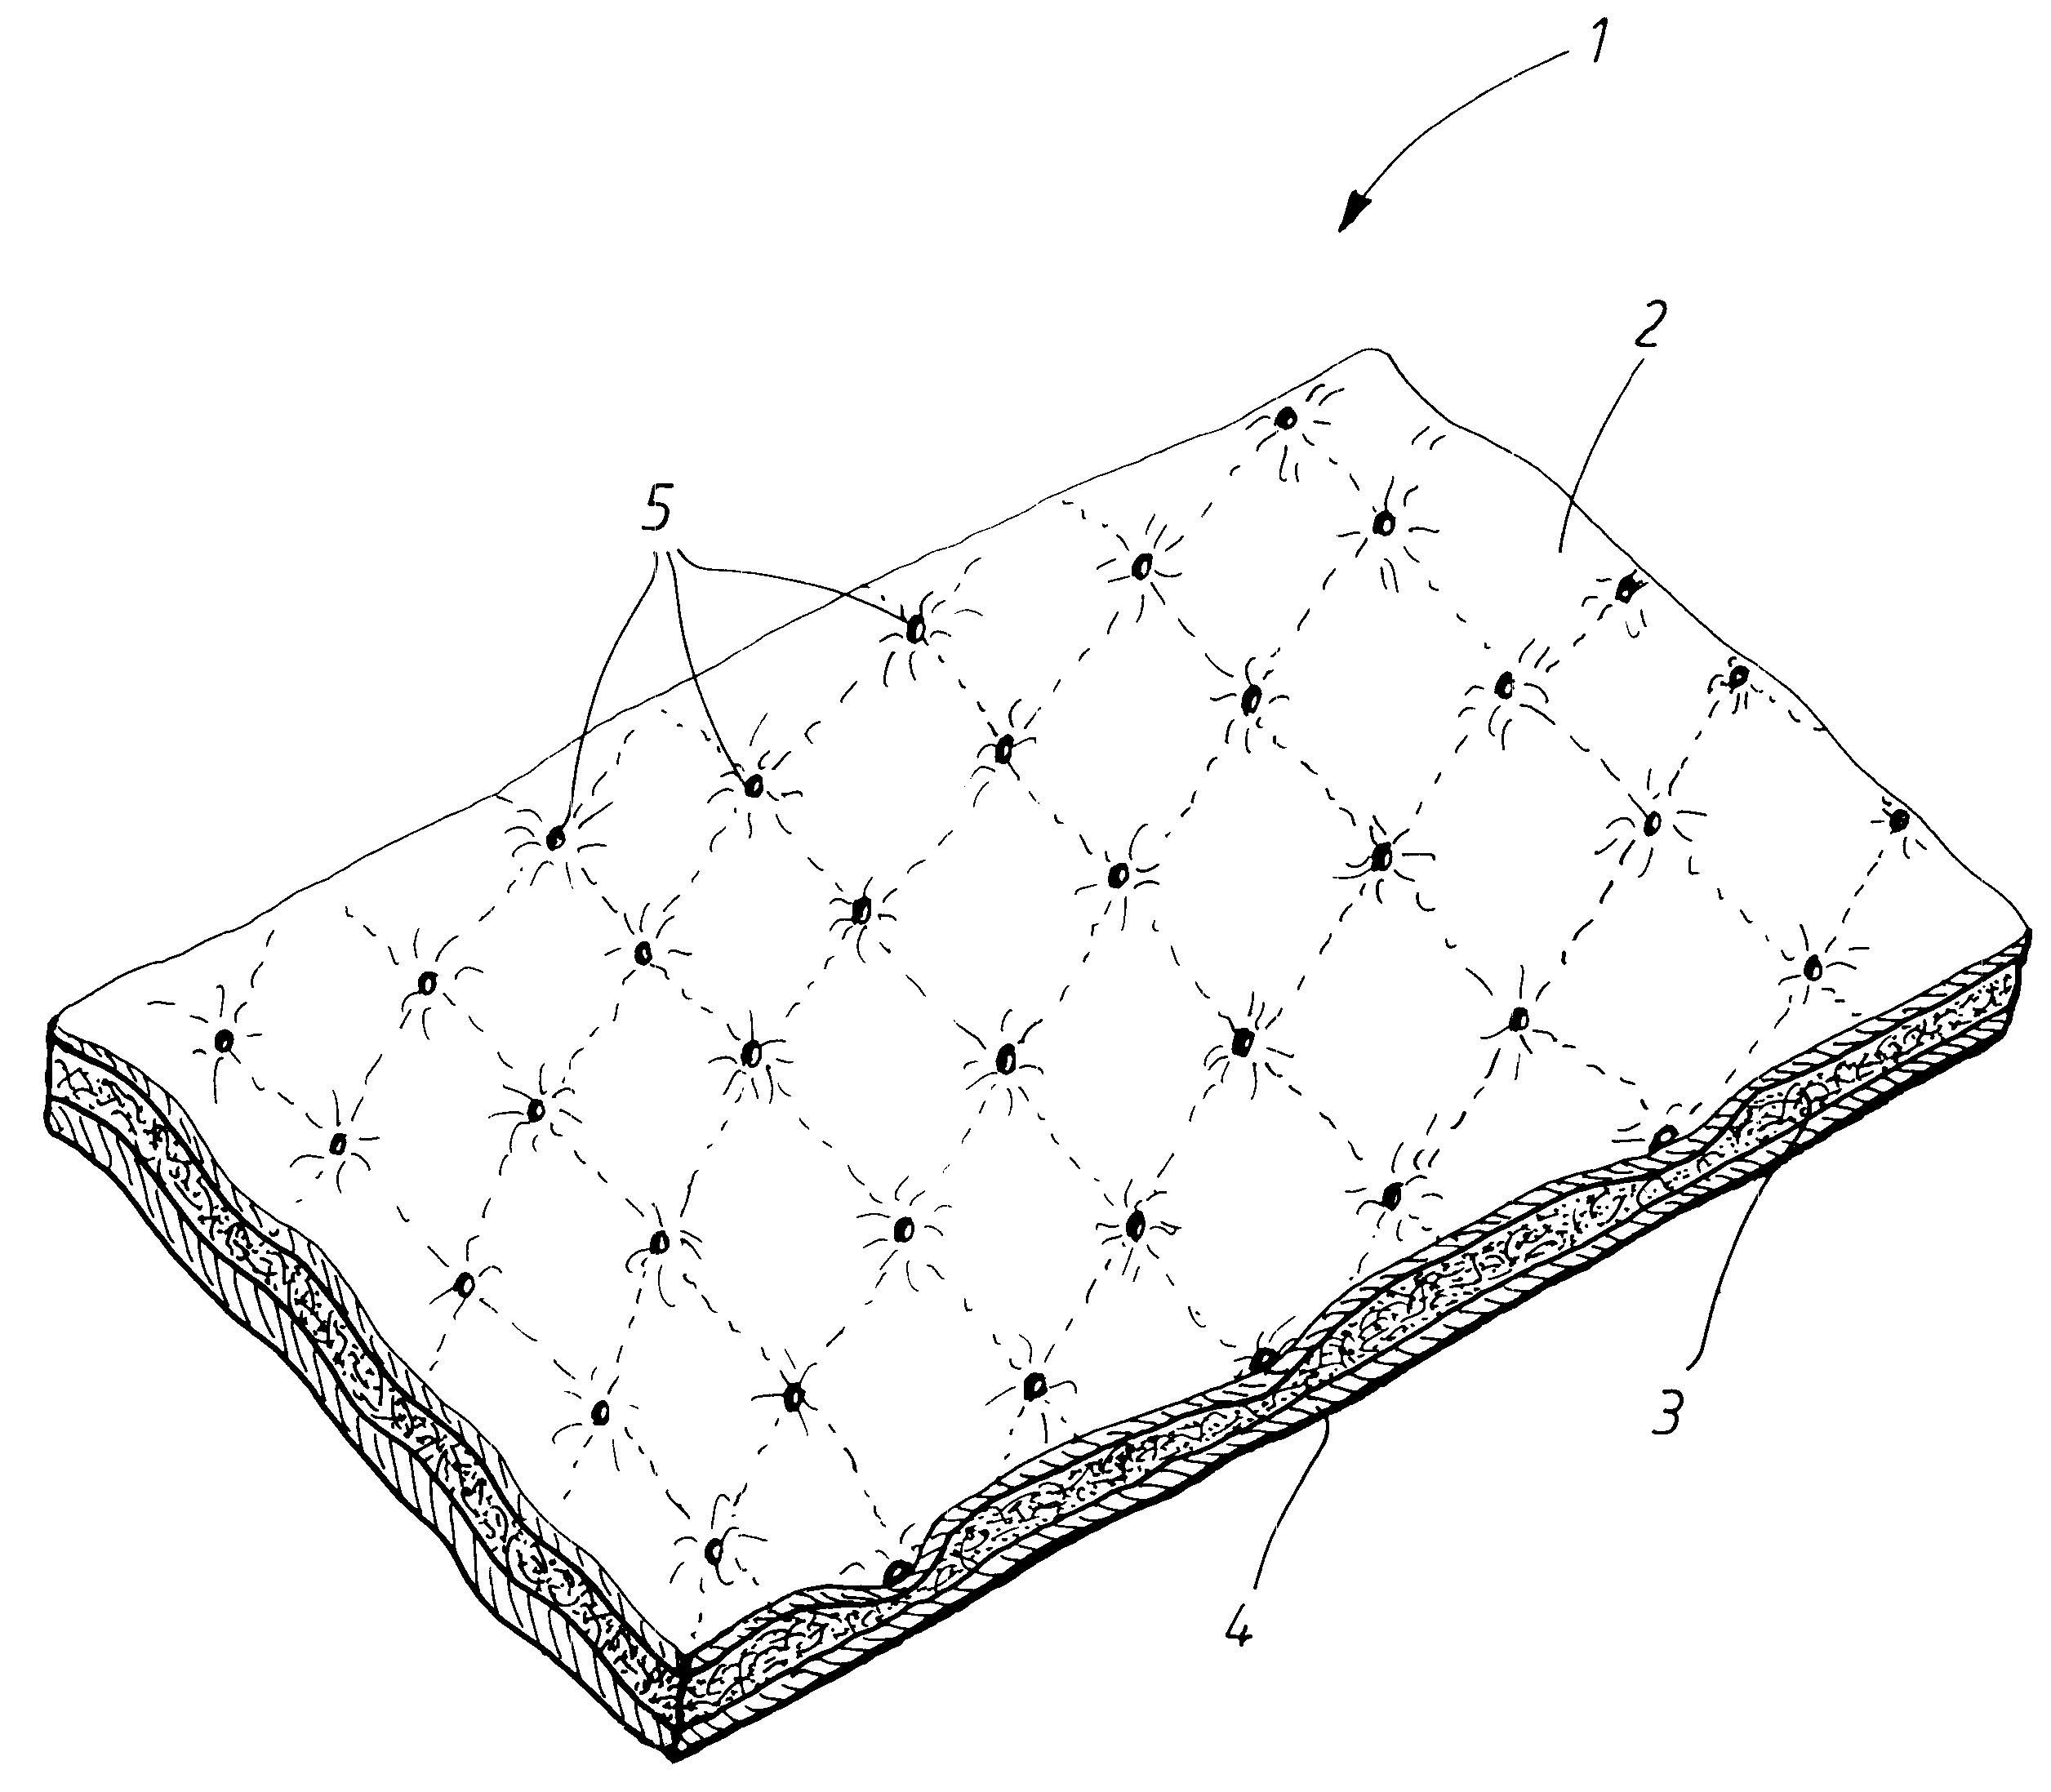 Absorbent product comprising at least one thermoplastic component to bond layers